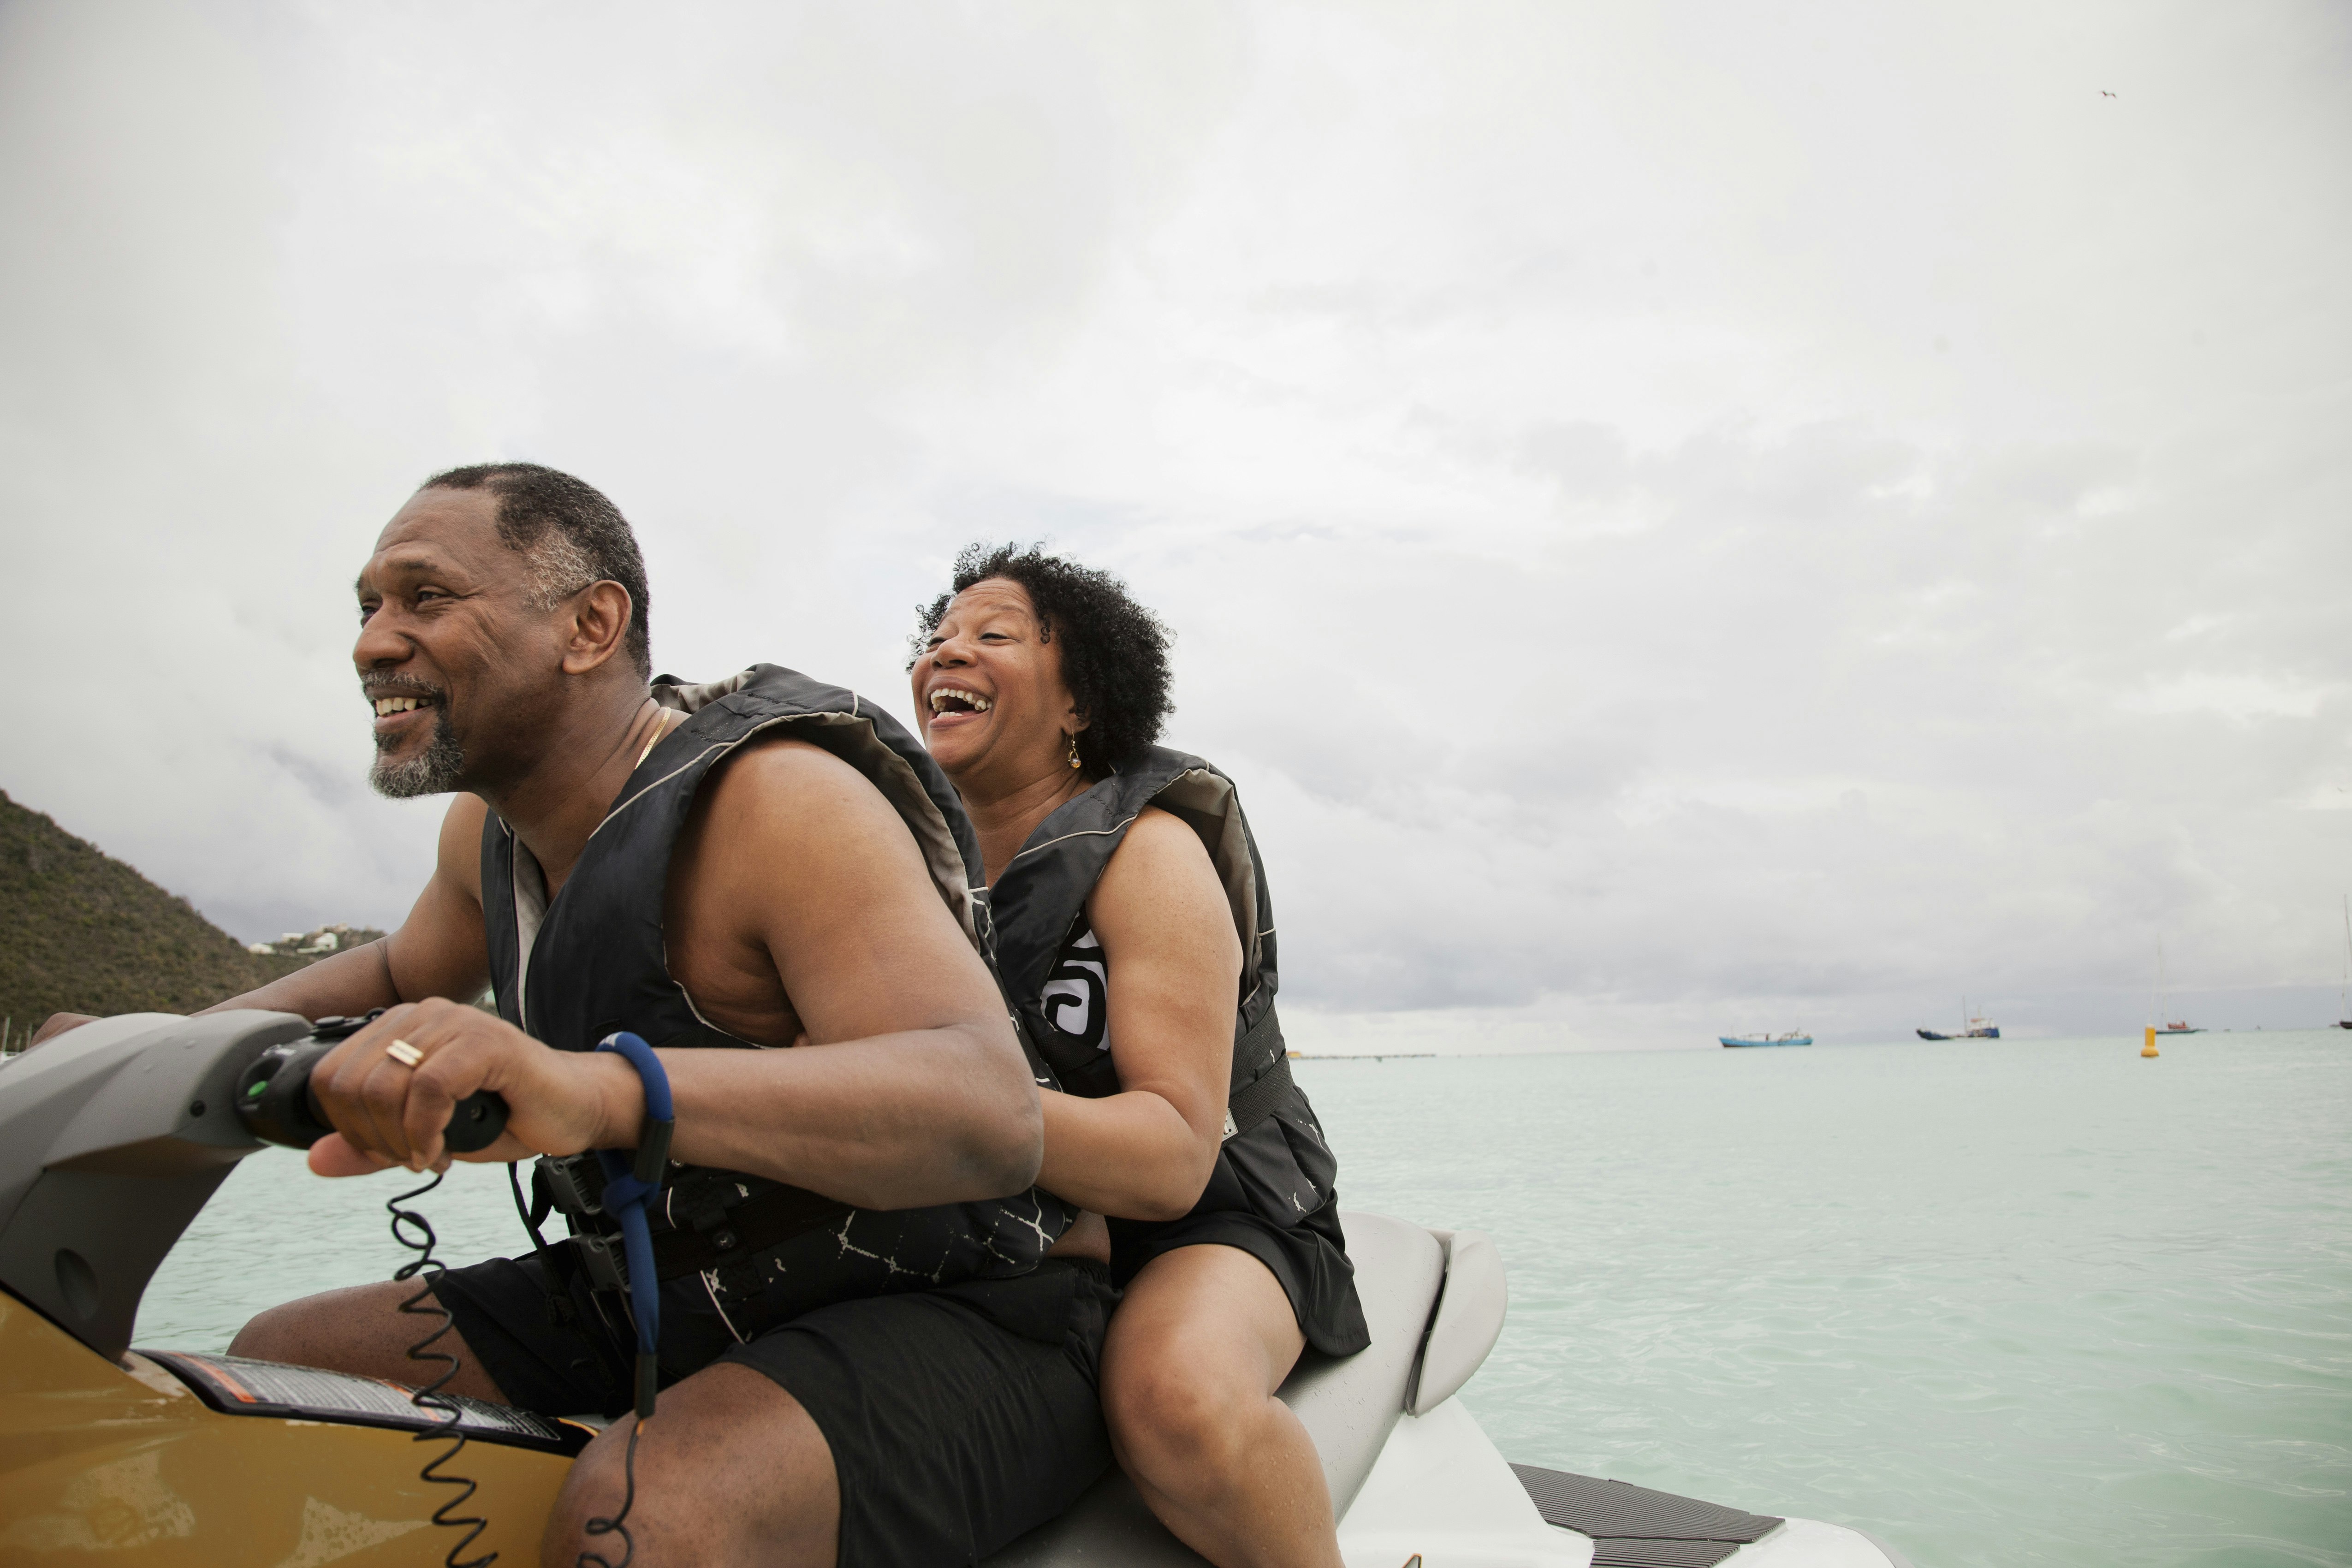 A woman smiles joyfully as she holds onto her partner, who is driving the jetski they're both riding.